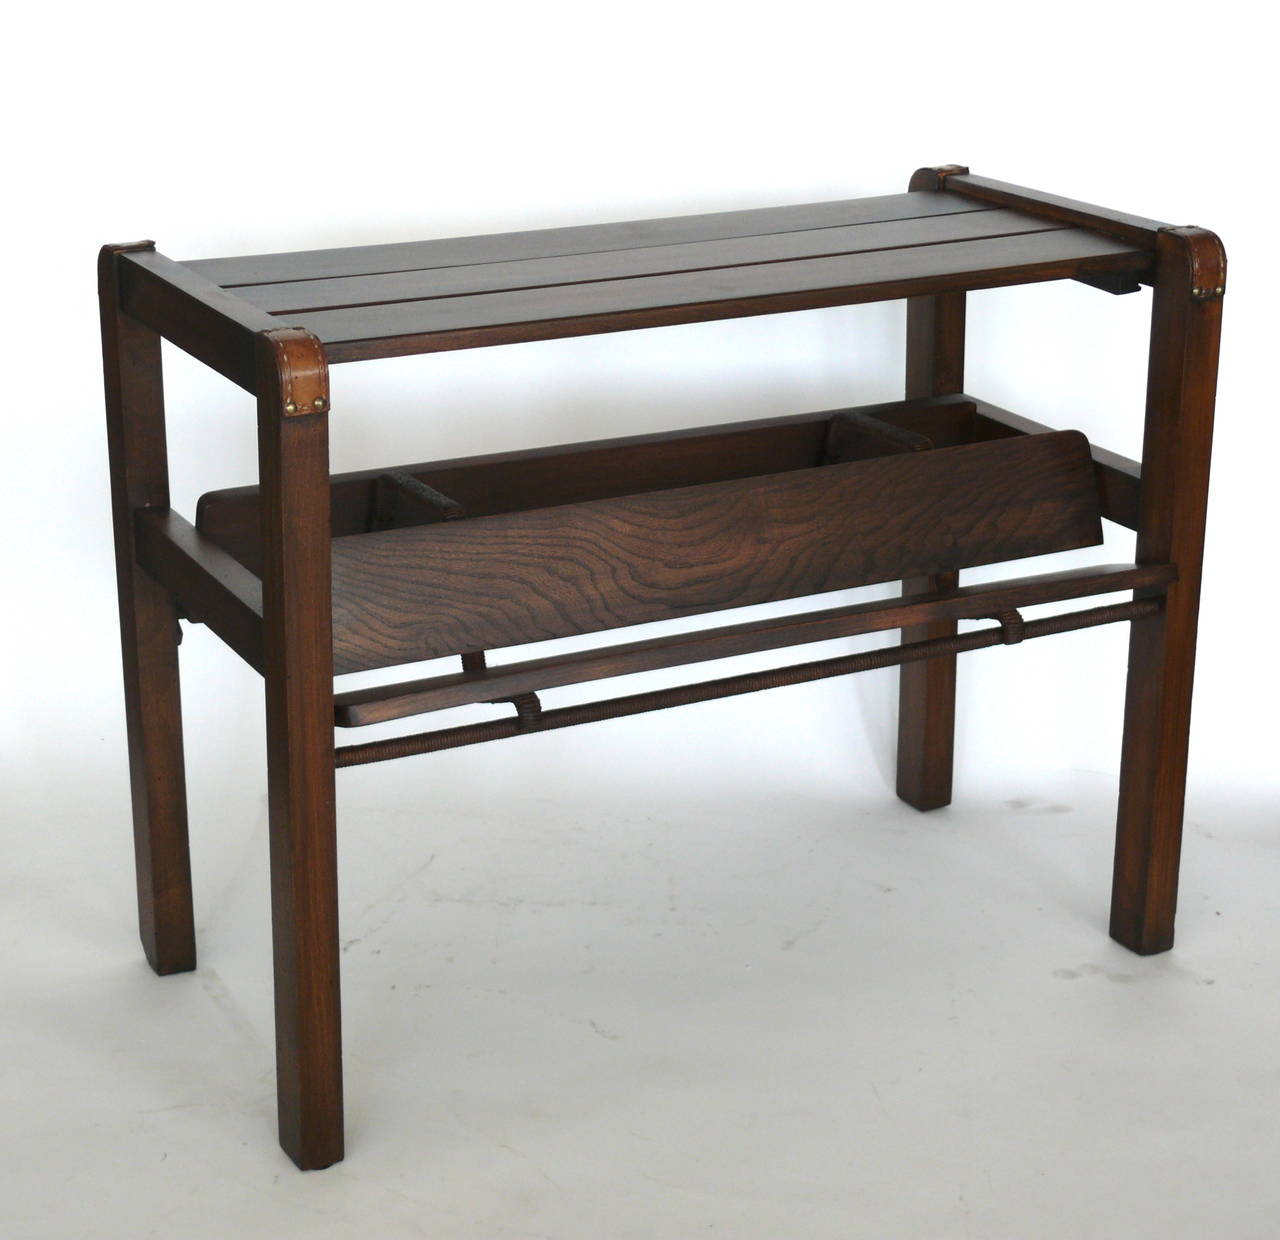 Handsome oak and mahogany magazine table by Jacques Adnet. Rectangular form with slatted top, inverted 